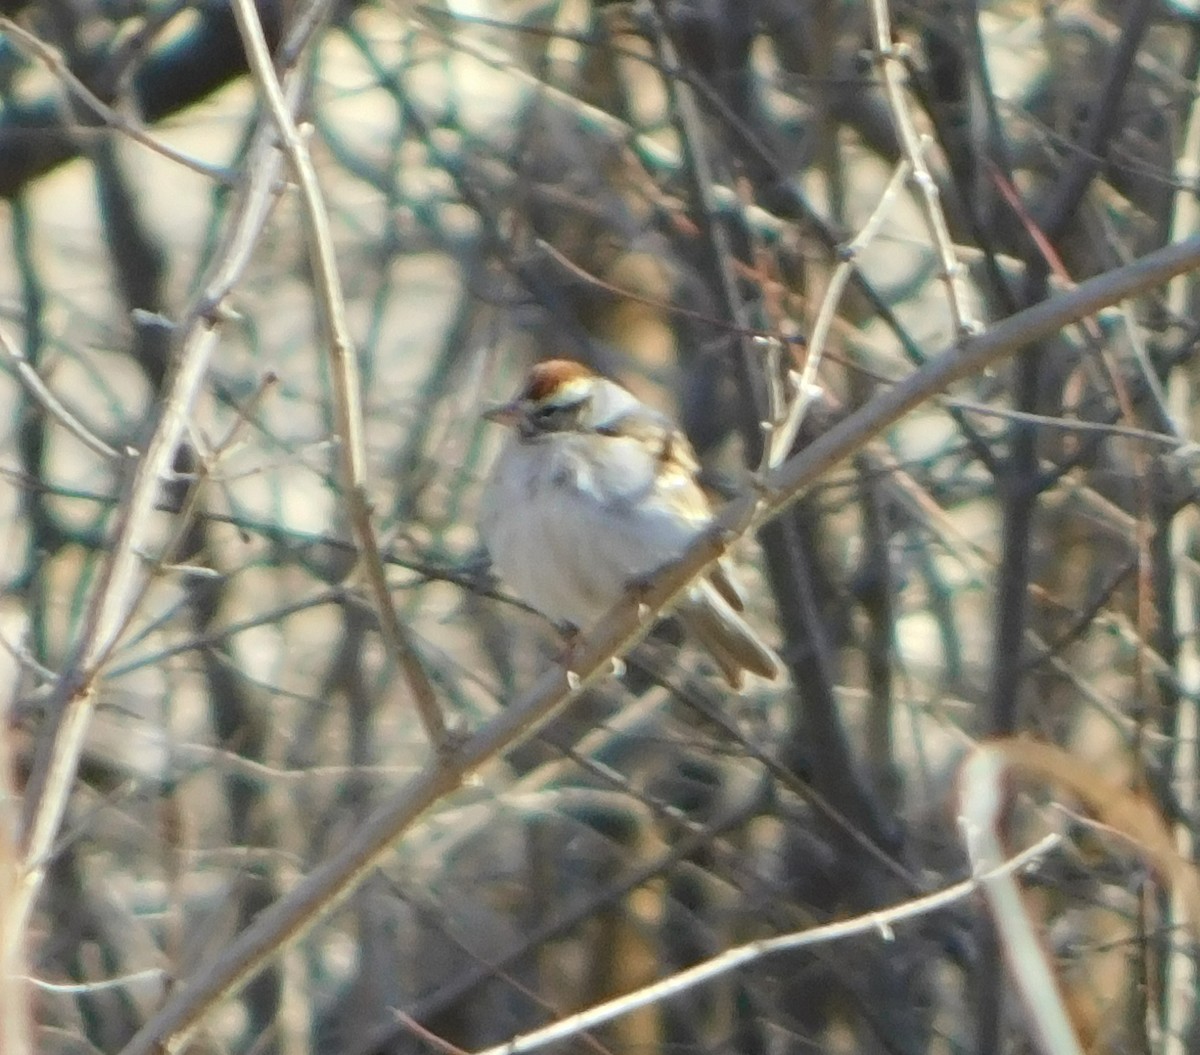 Chipping Sparrow - Eric Hough